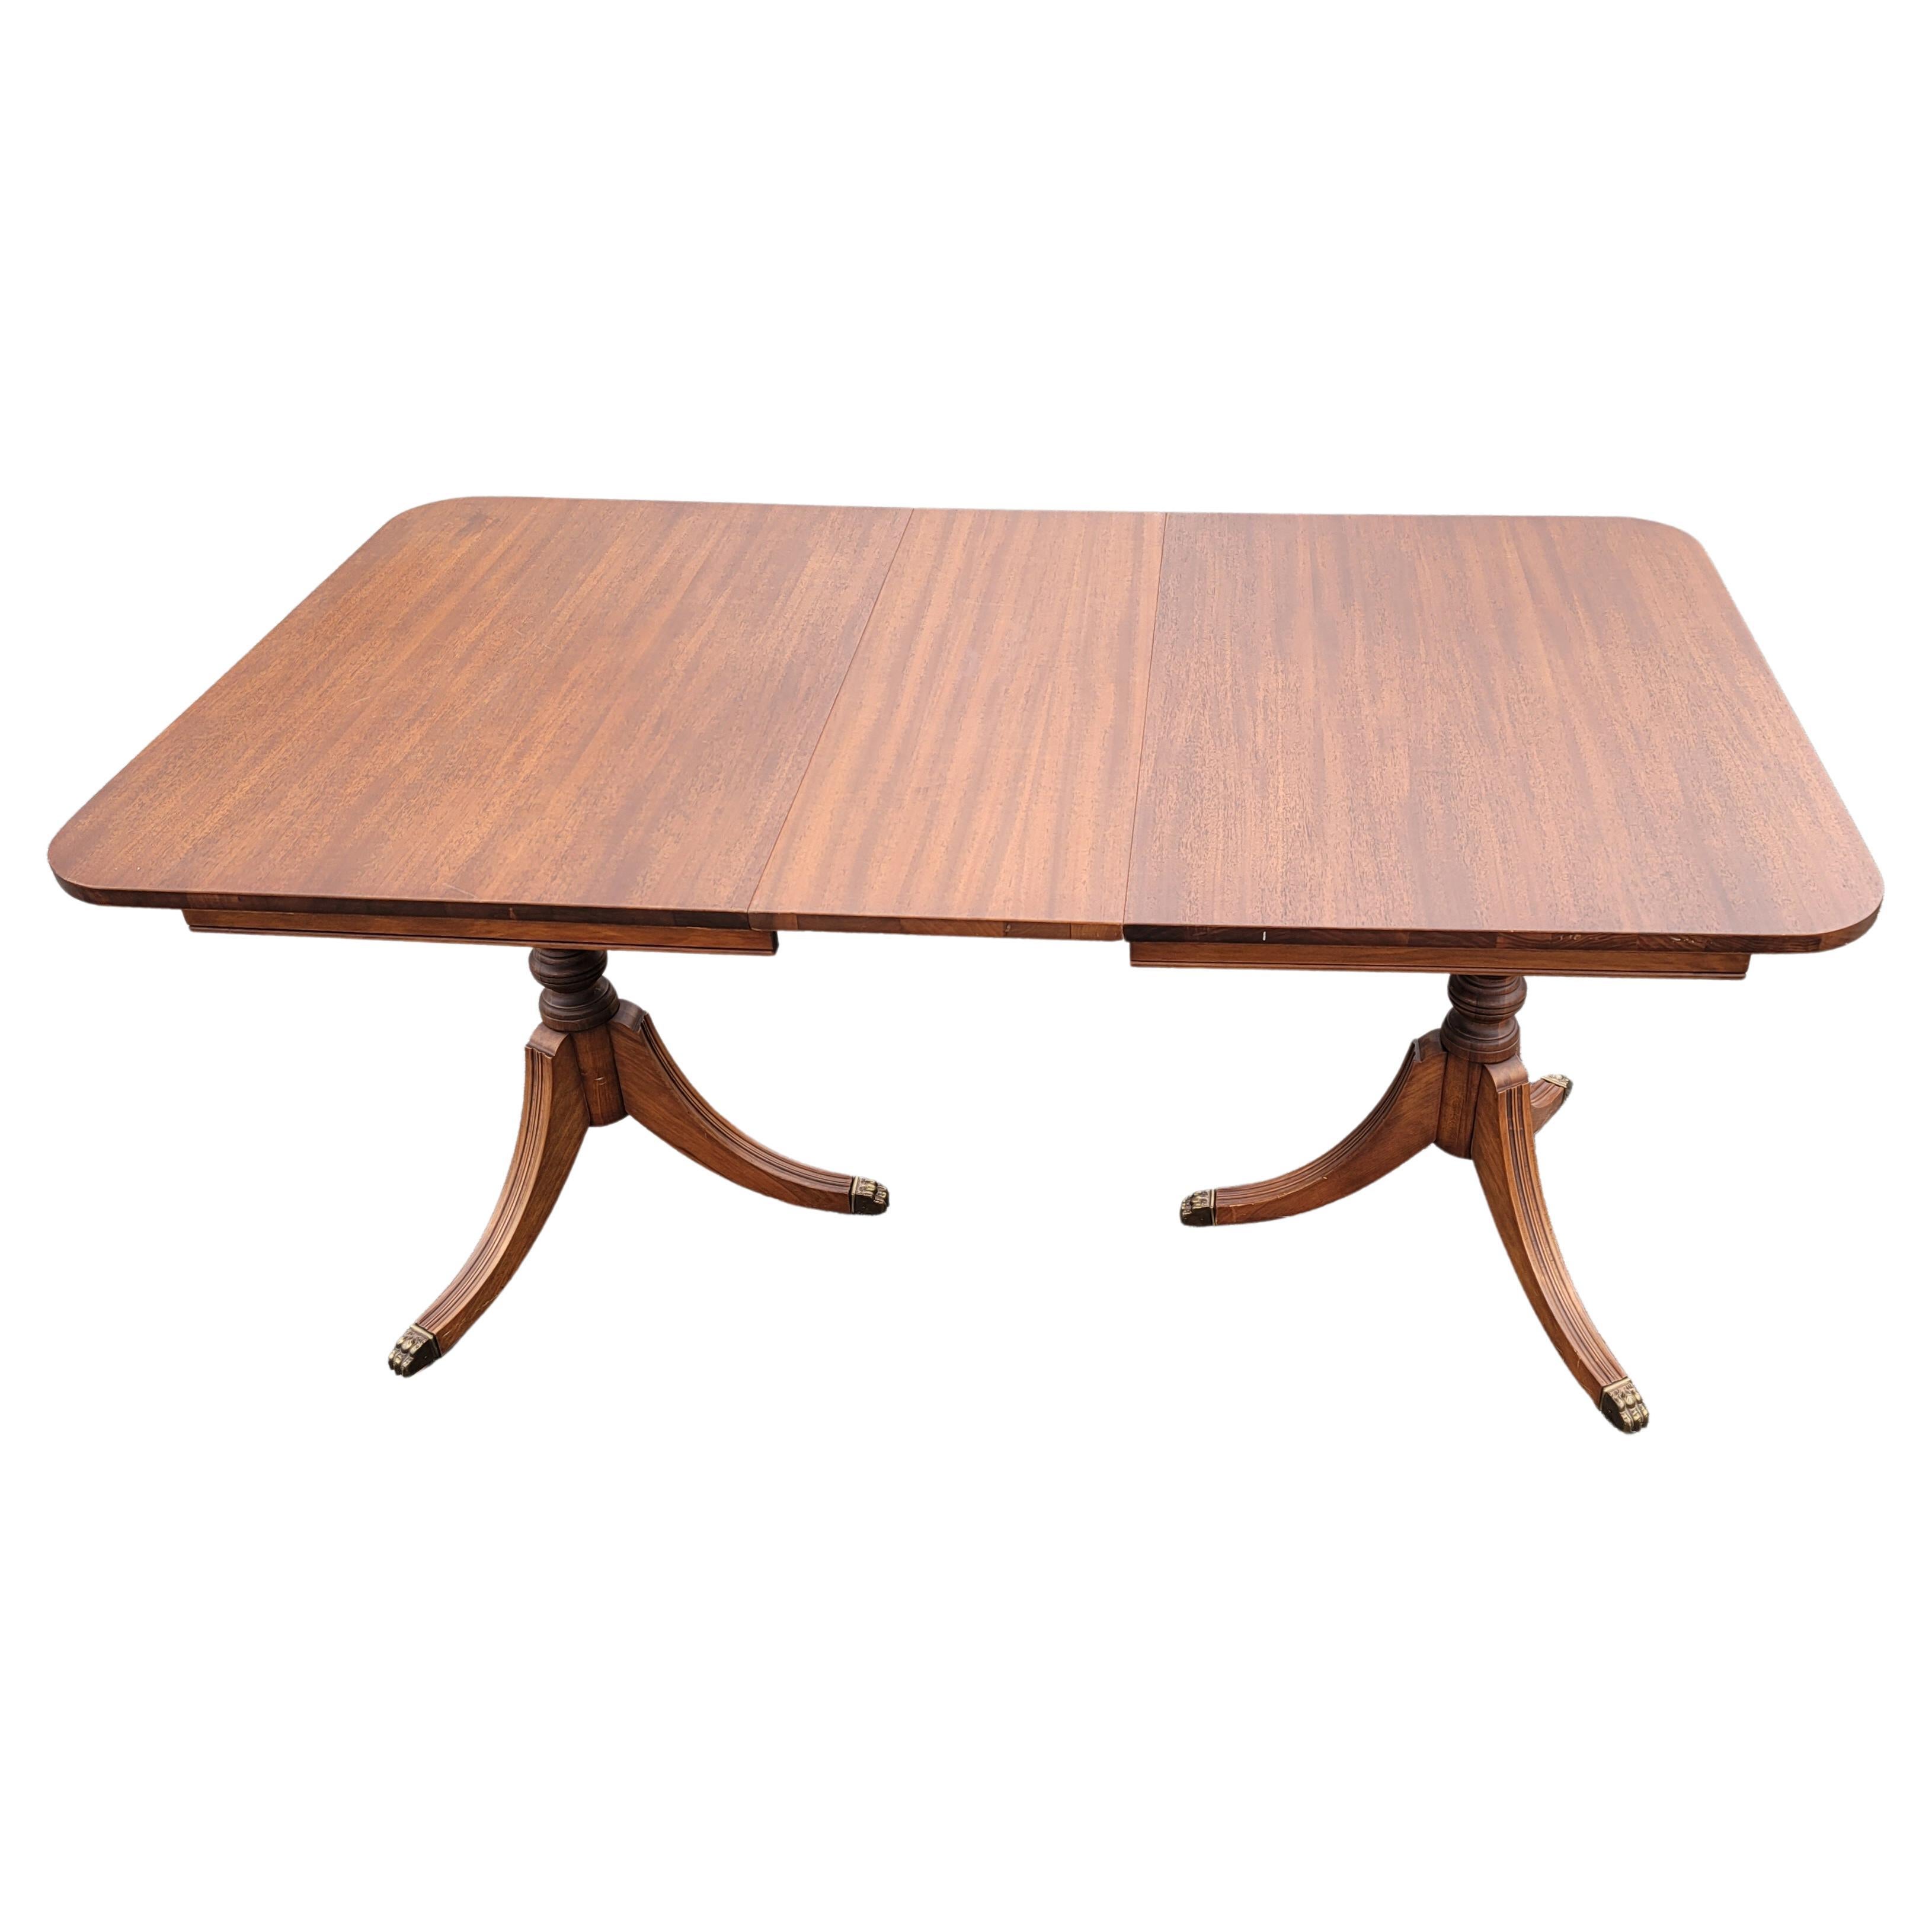 George III 1930s Newly Refinished Double Pedestal Mahogany Extension Dining Table For Sale